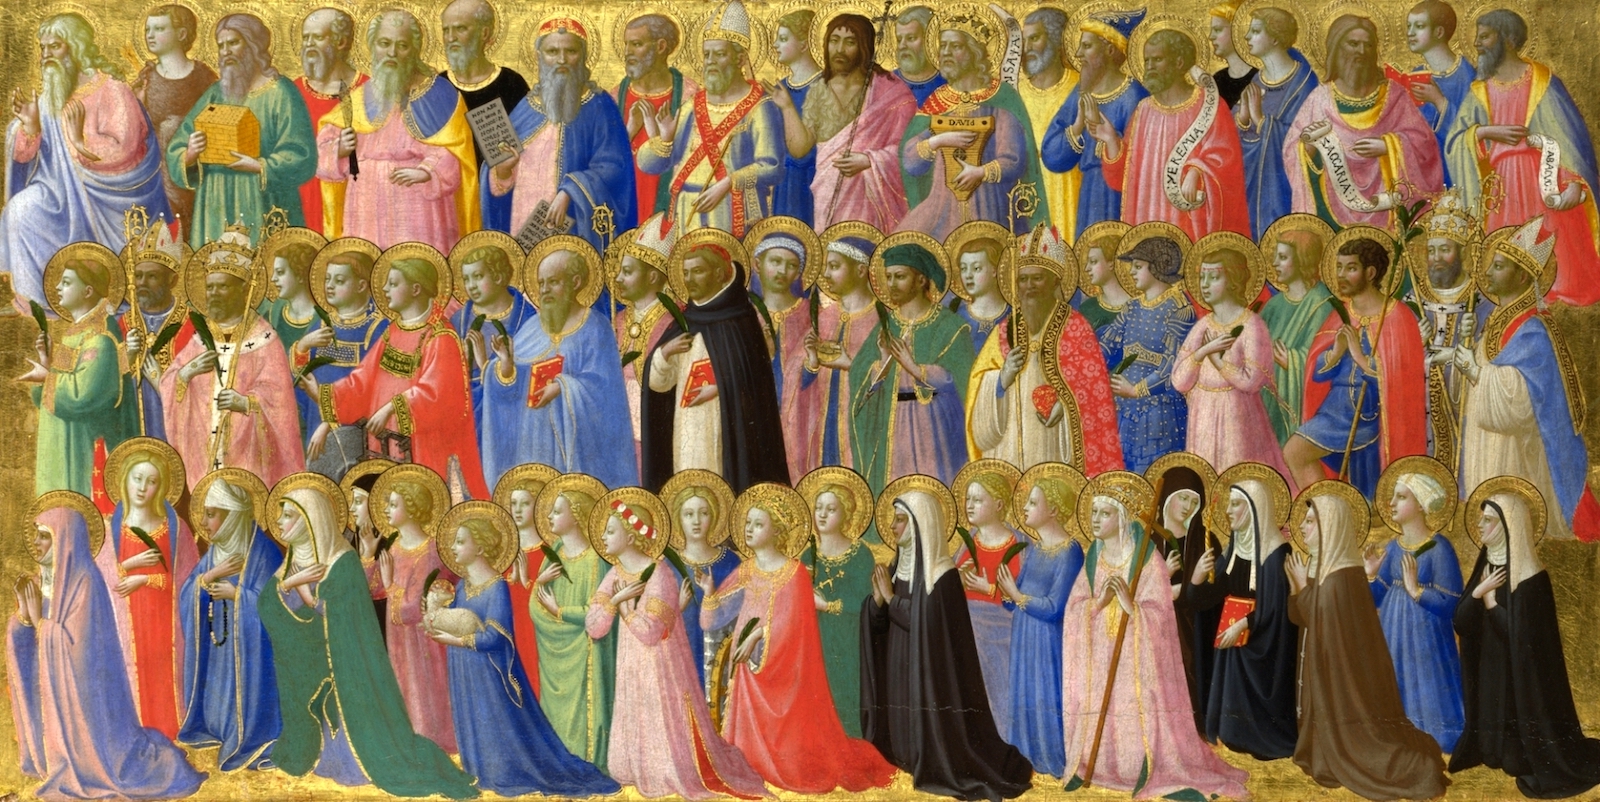 The Forerunners of Christ with Saints and Martyrs by Fra Angelico - about 1423-4 - 31.9 x 63.5 cm National Gallery